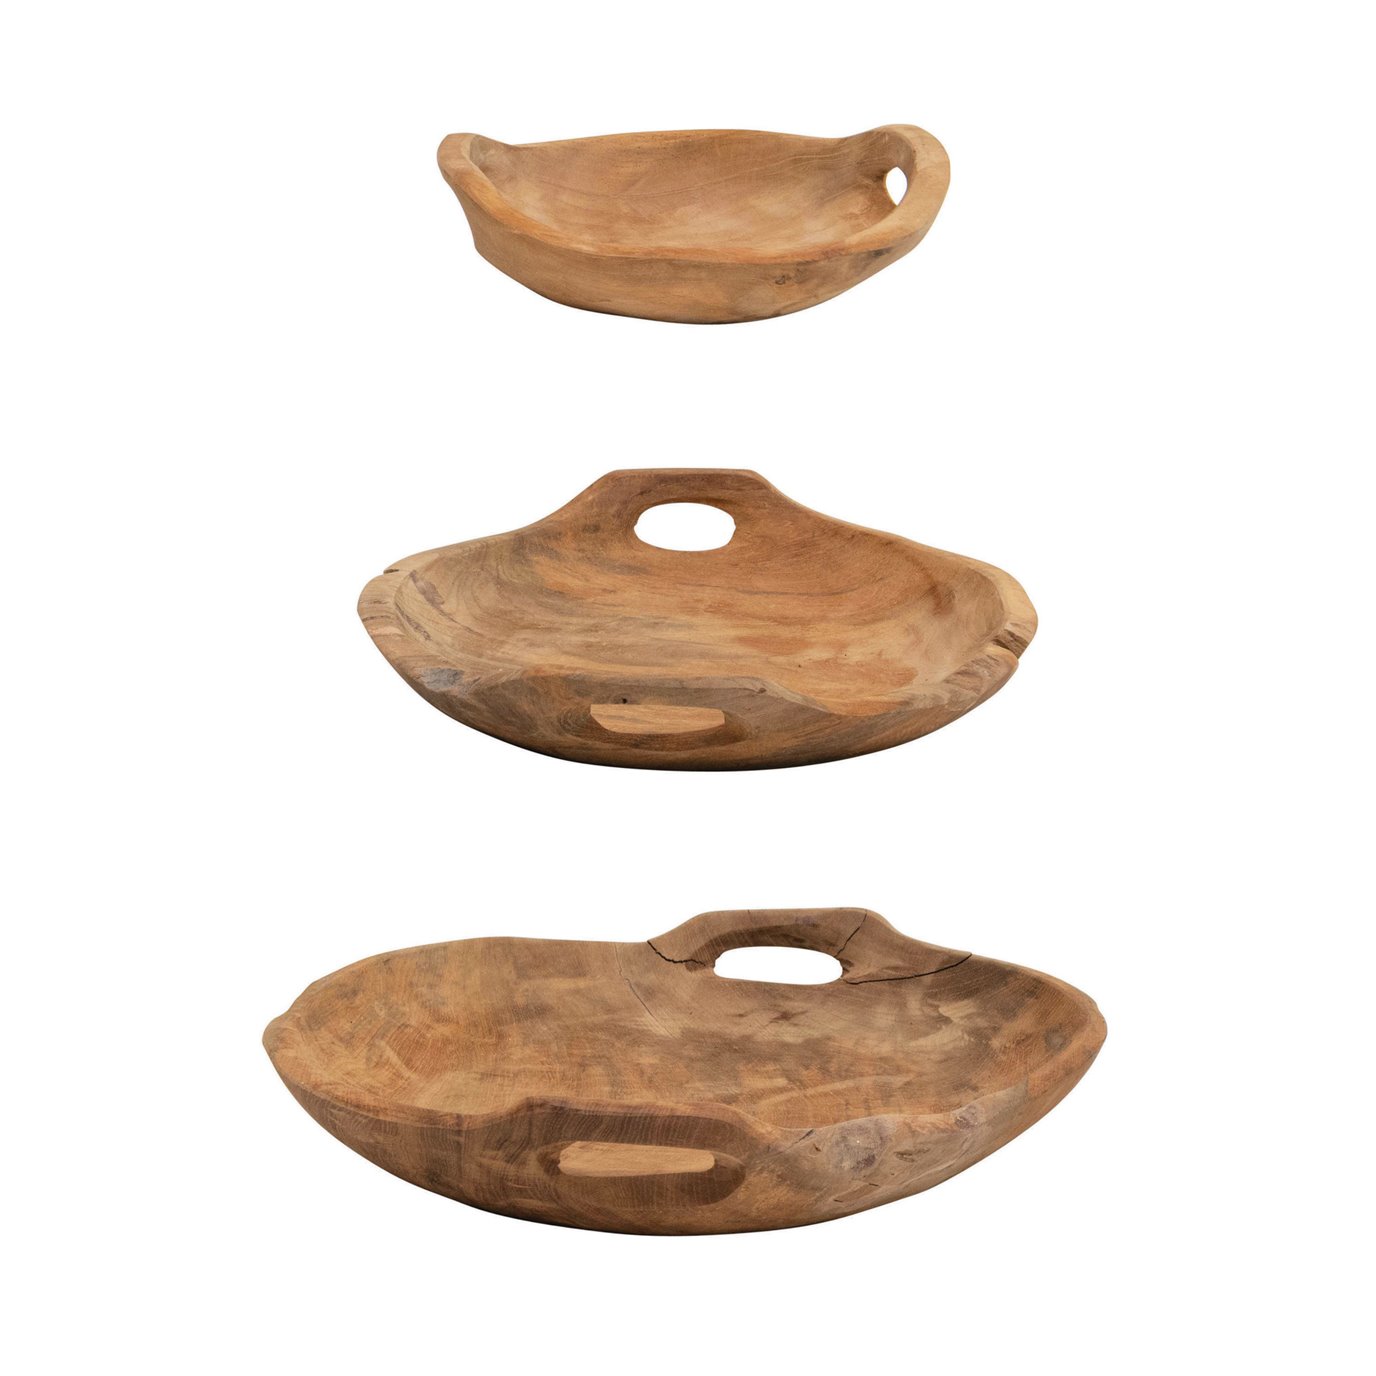 Teak Wood Bowls with Handles, Set of 3 (Each One Will Vary)